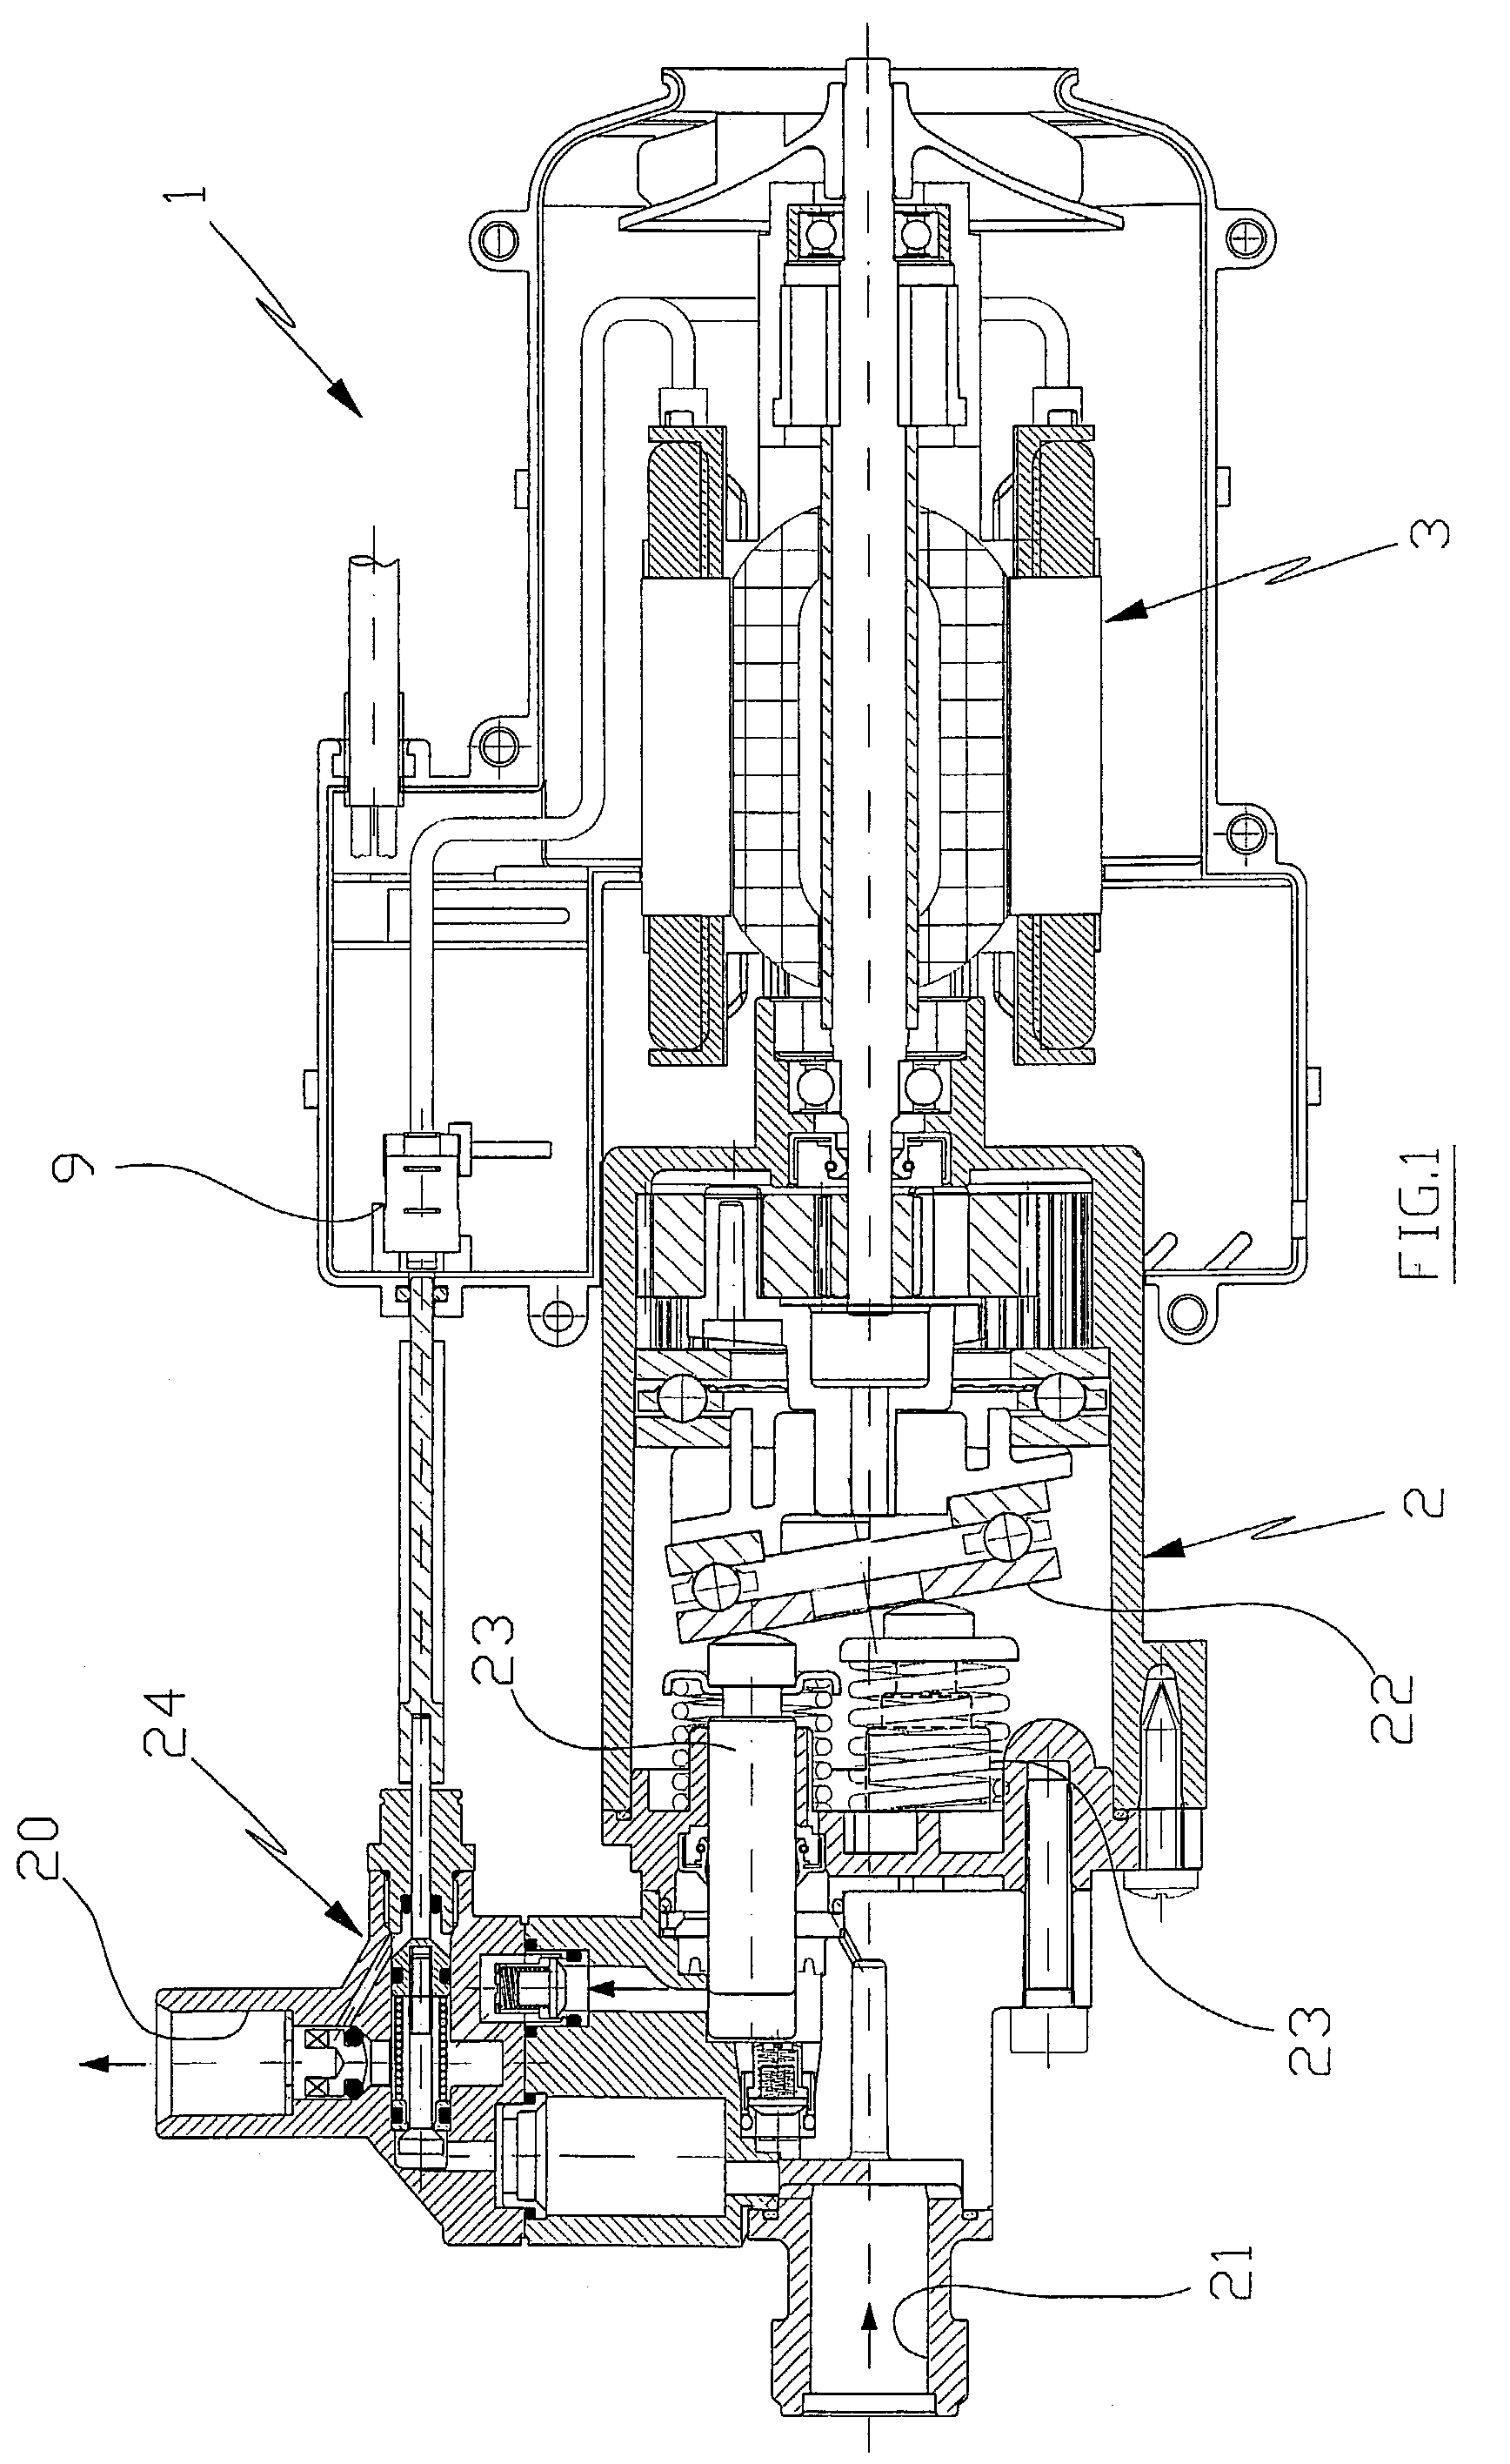 Device for varying the pressure of the fluid delivered by a jet washer